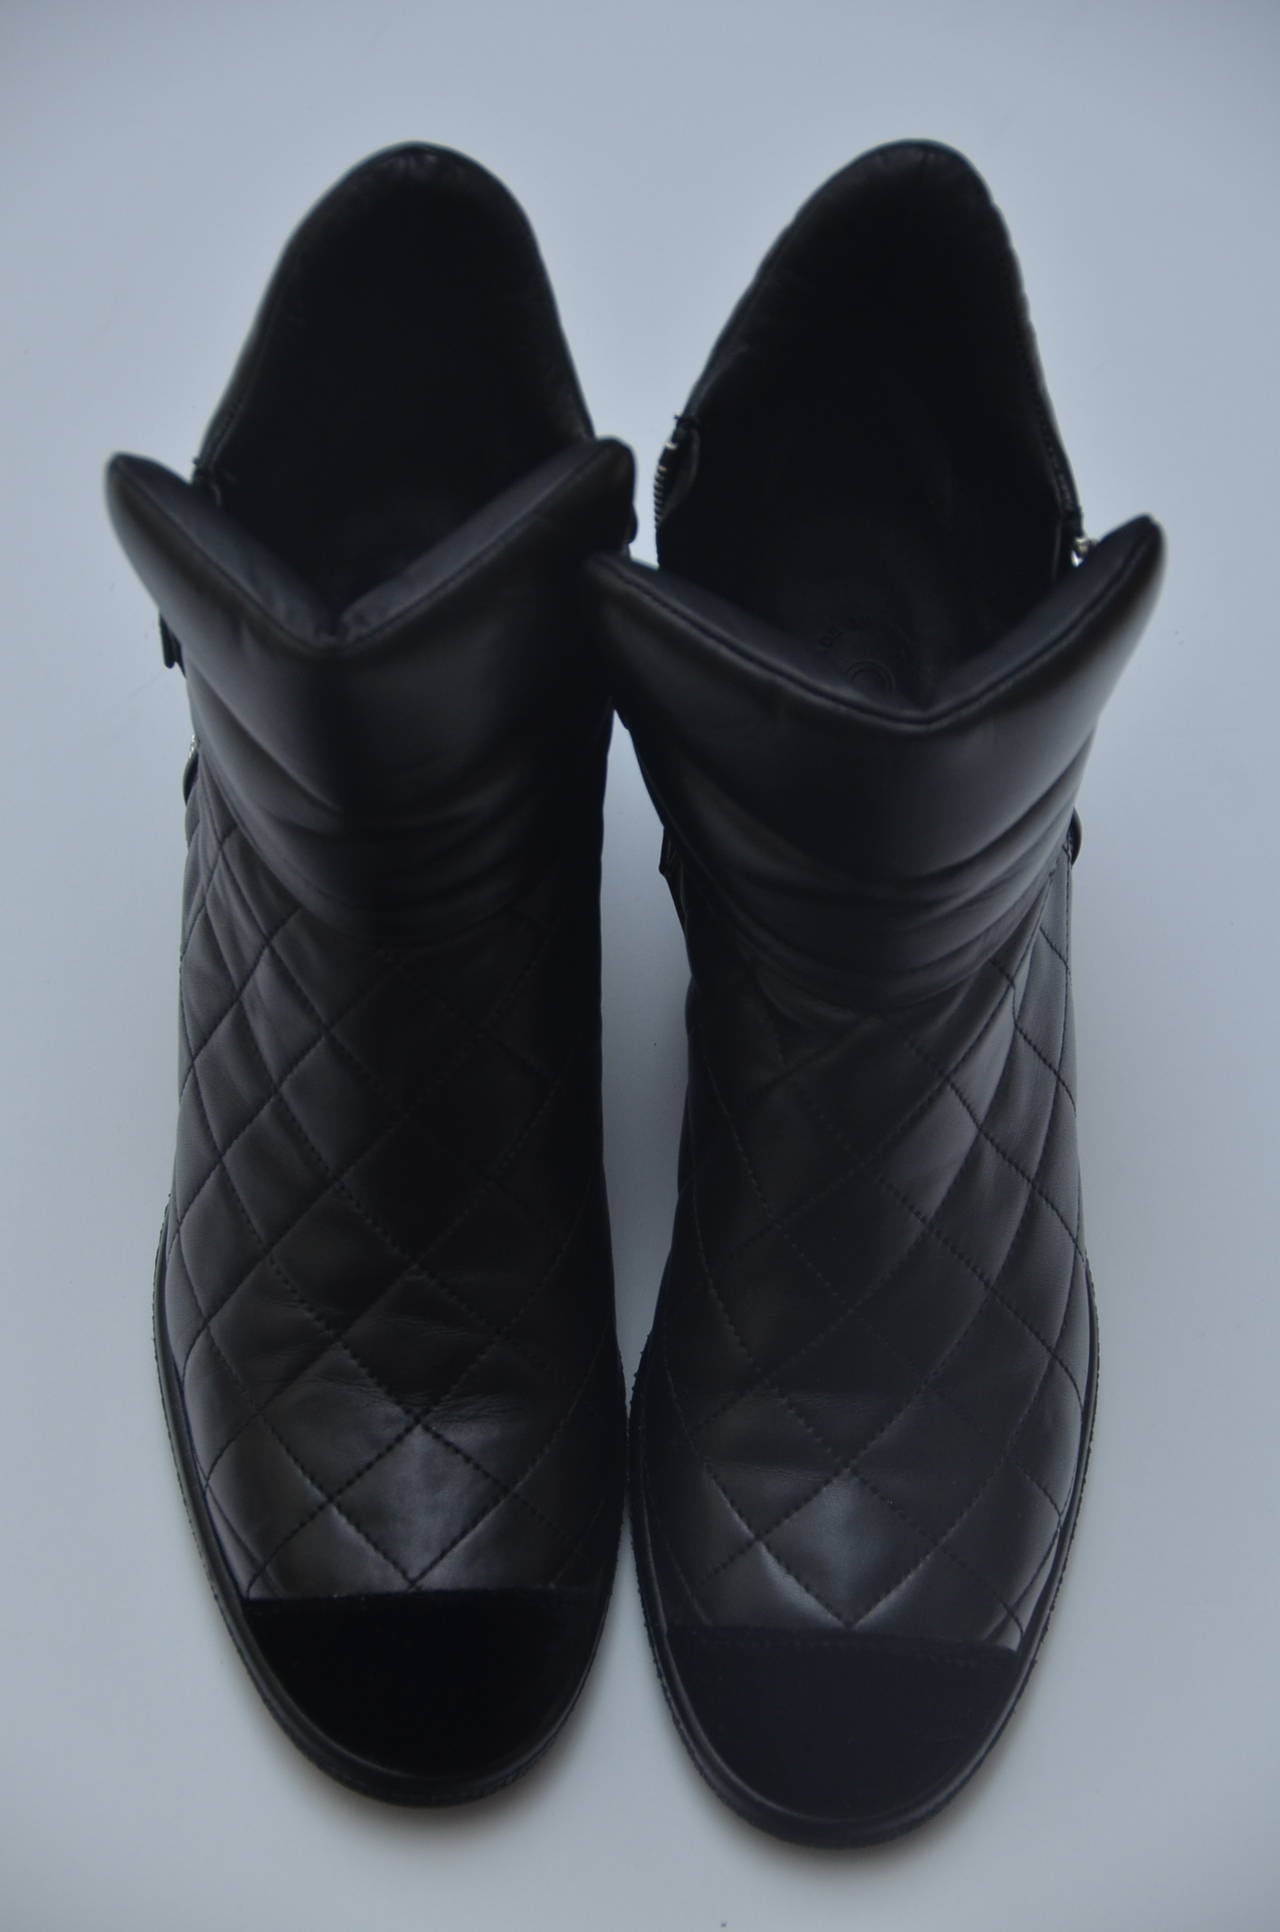 Women's Chanel Lambskin Quilted Boots 39.5